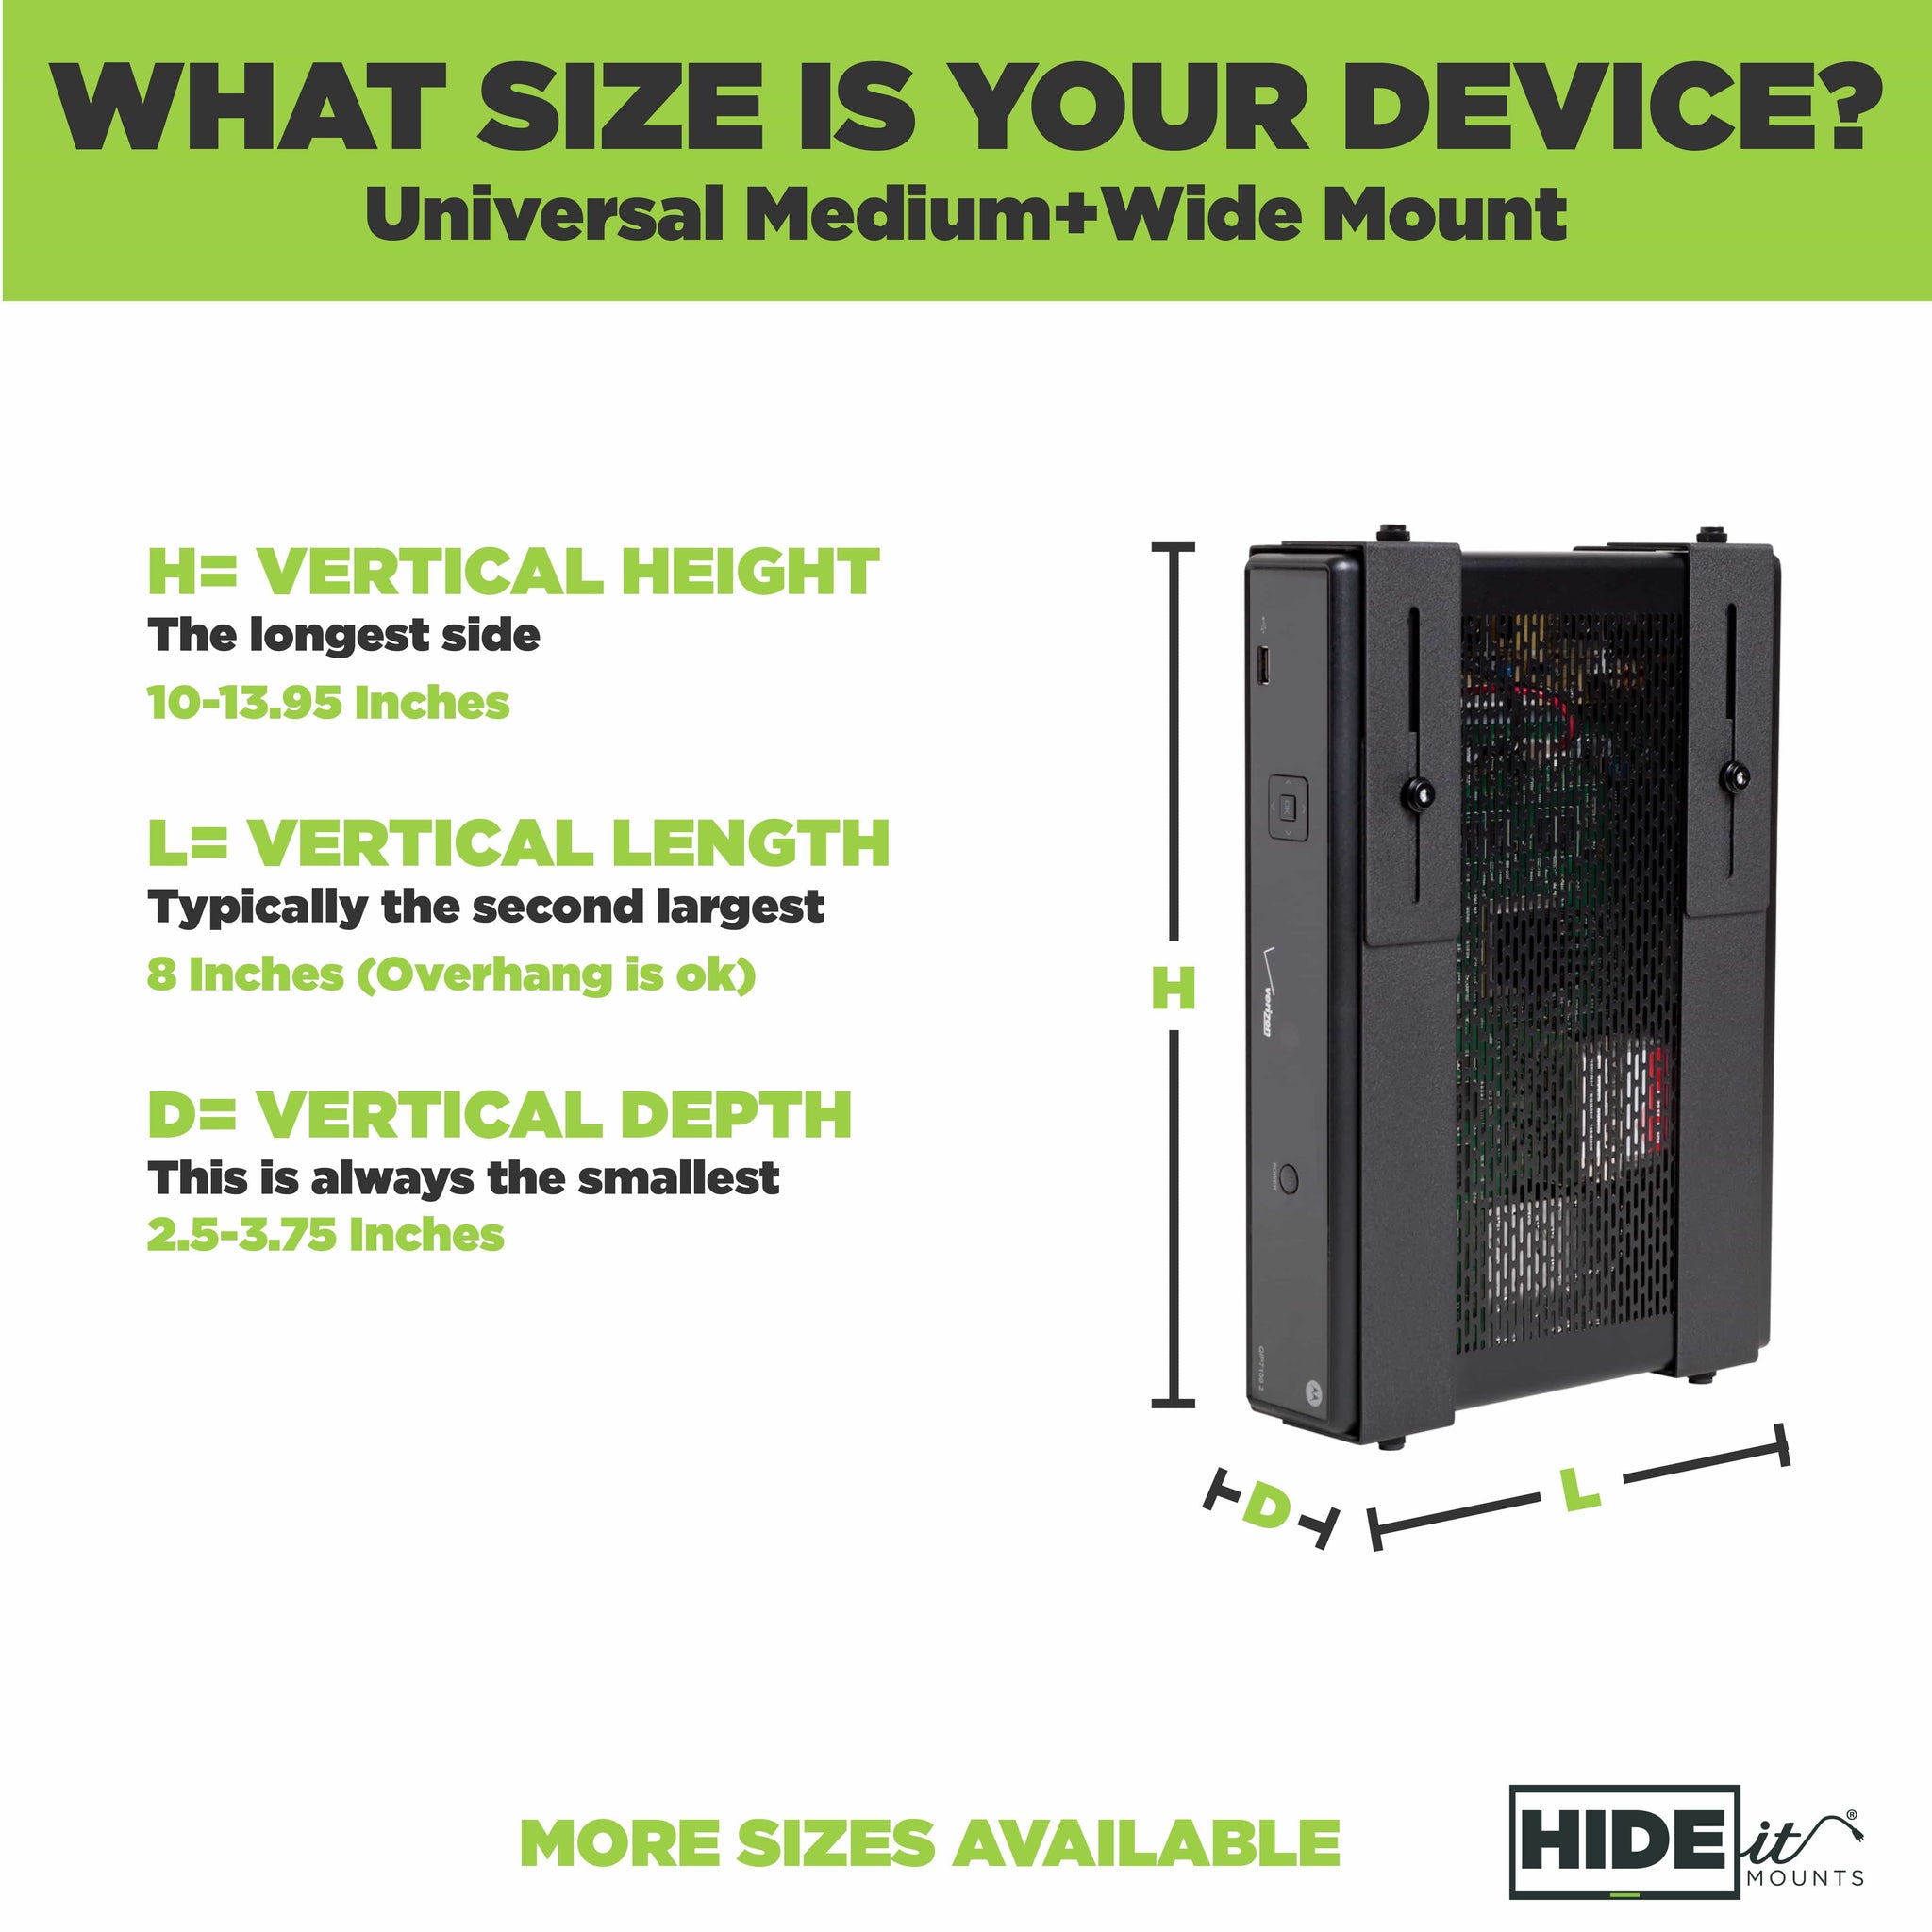 What size is your device? Universal medium + wide mount. More sizes available. A mount with a cable box in it.